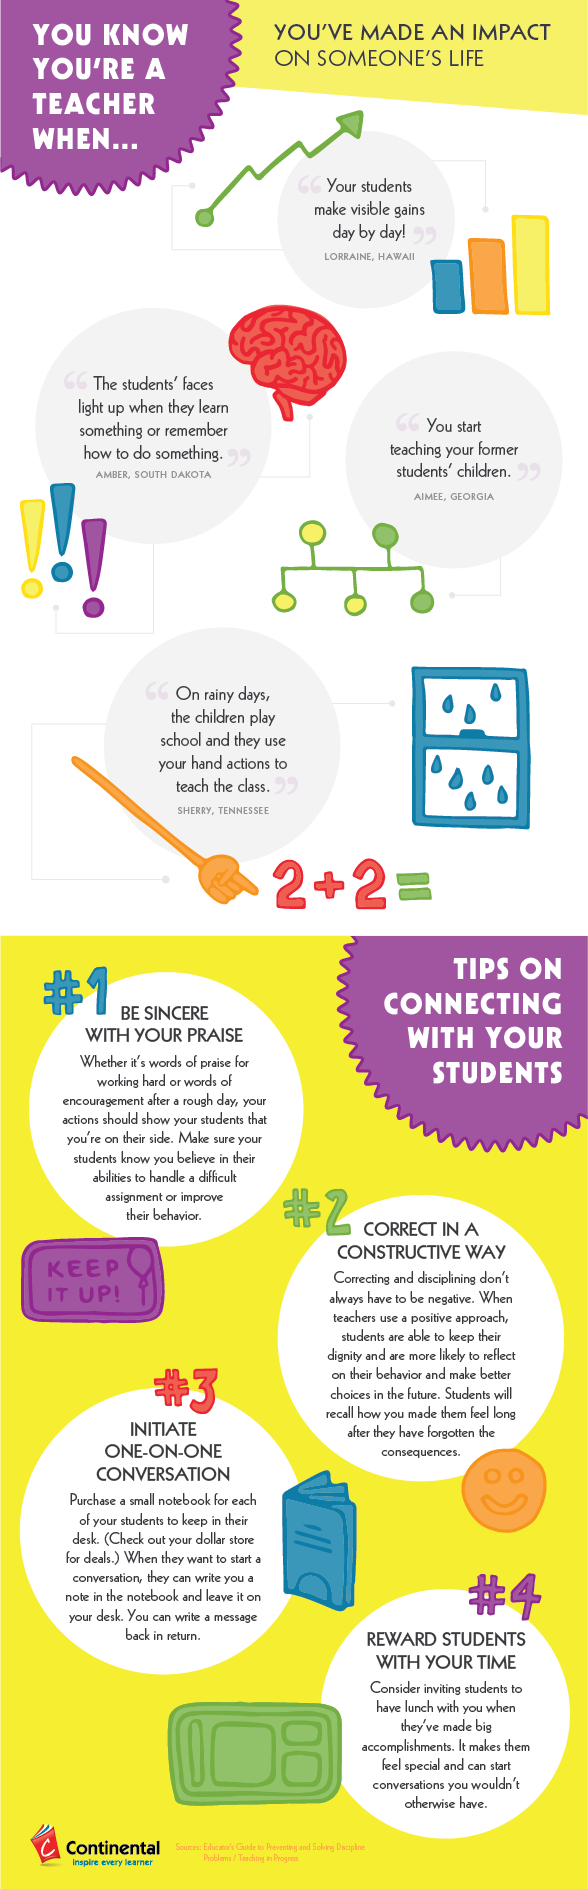 You Know You're a Teacher When...You've Made An Impact infographic